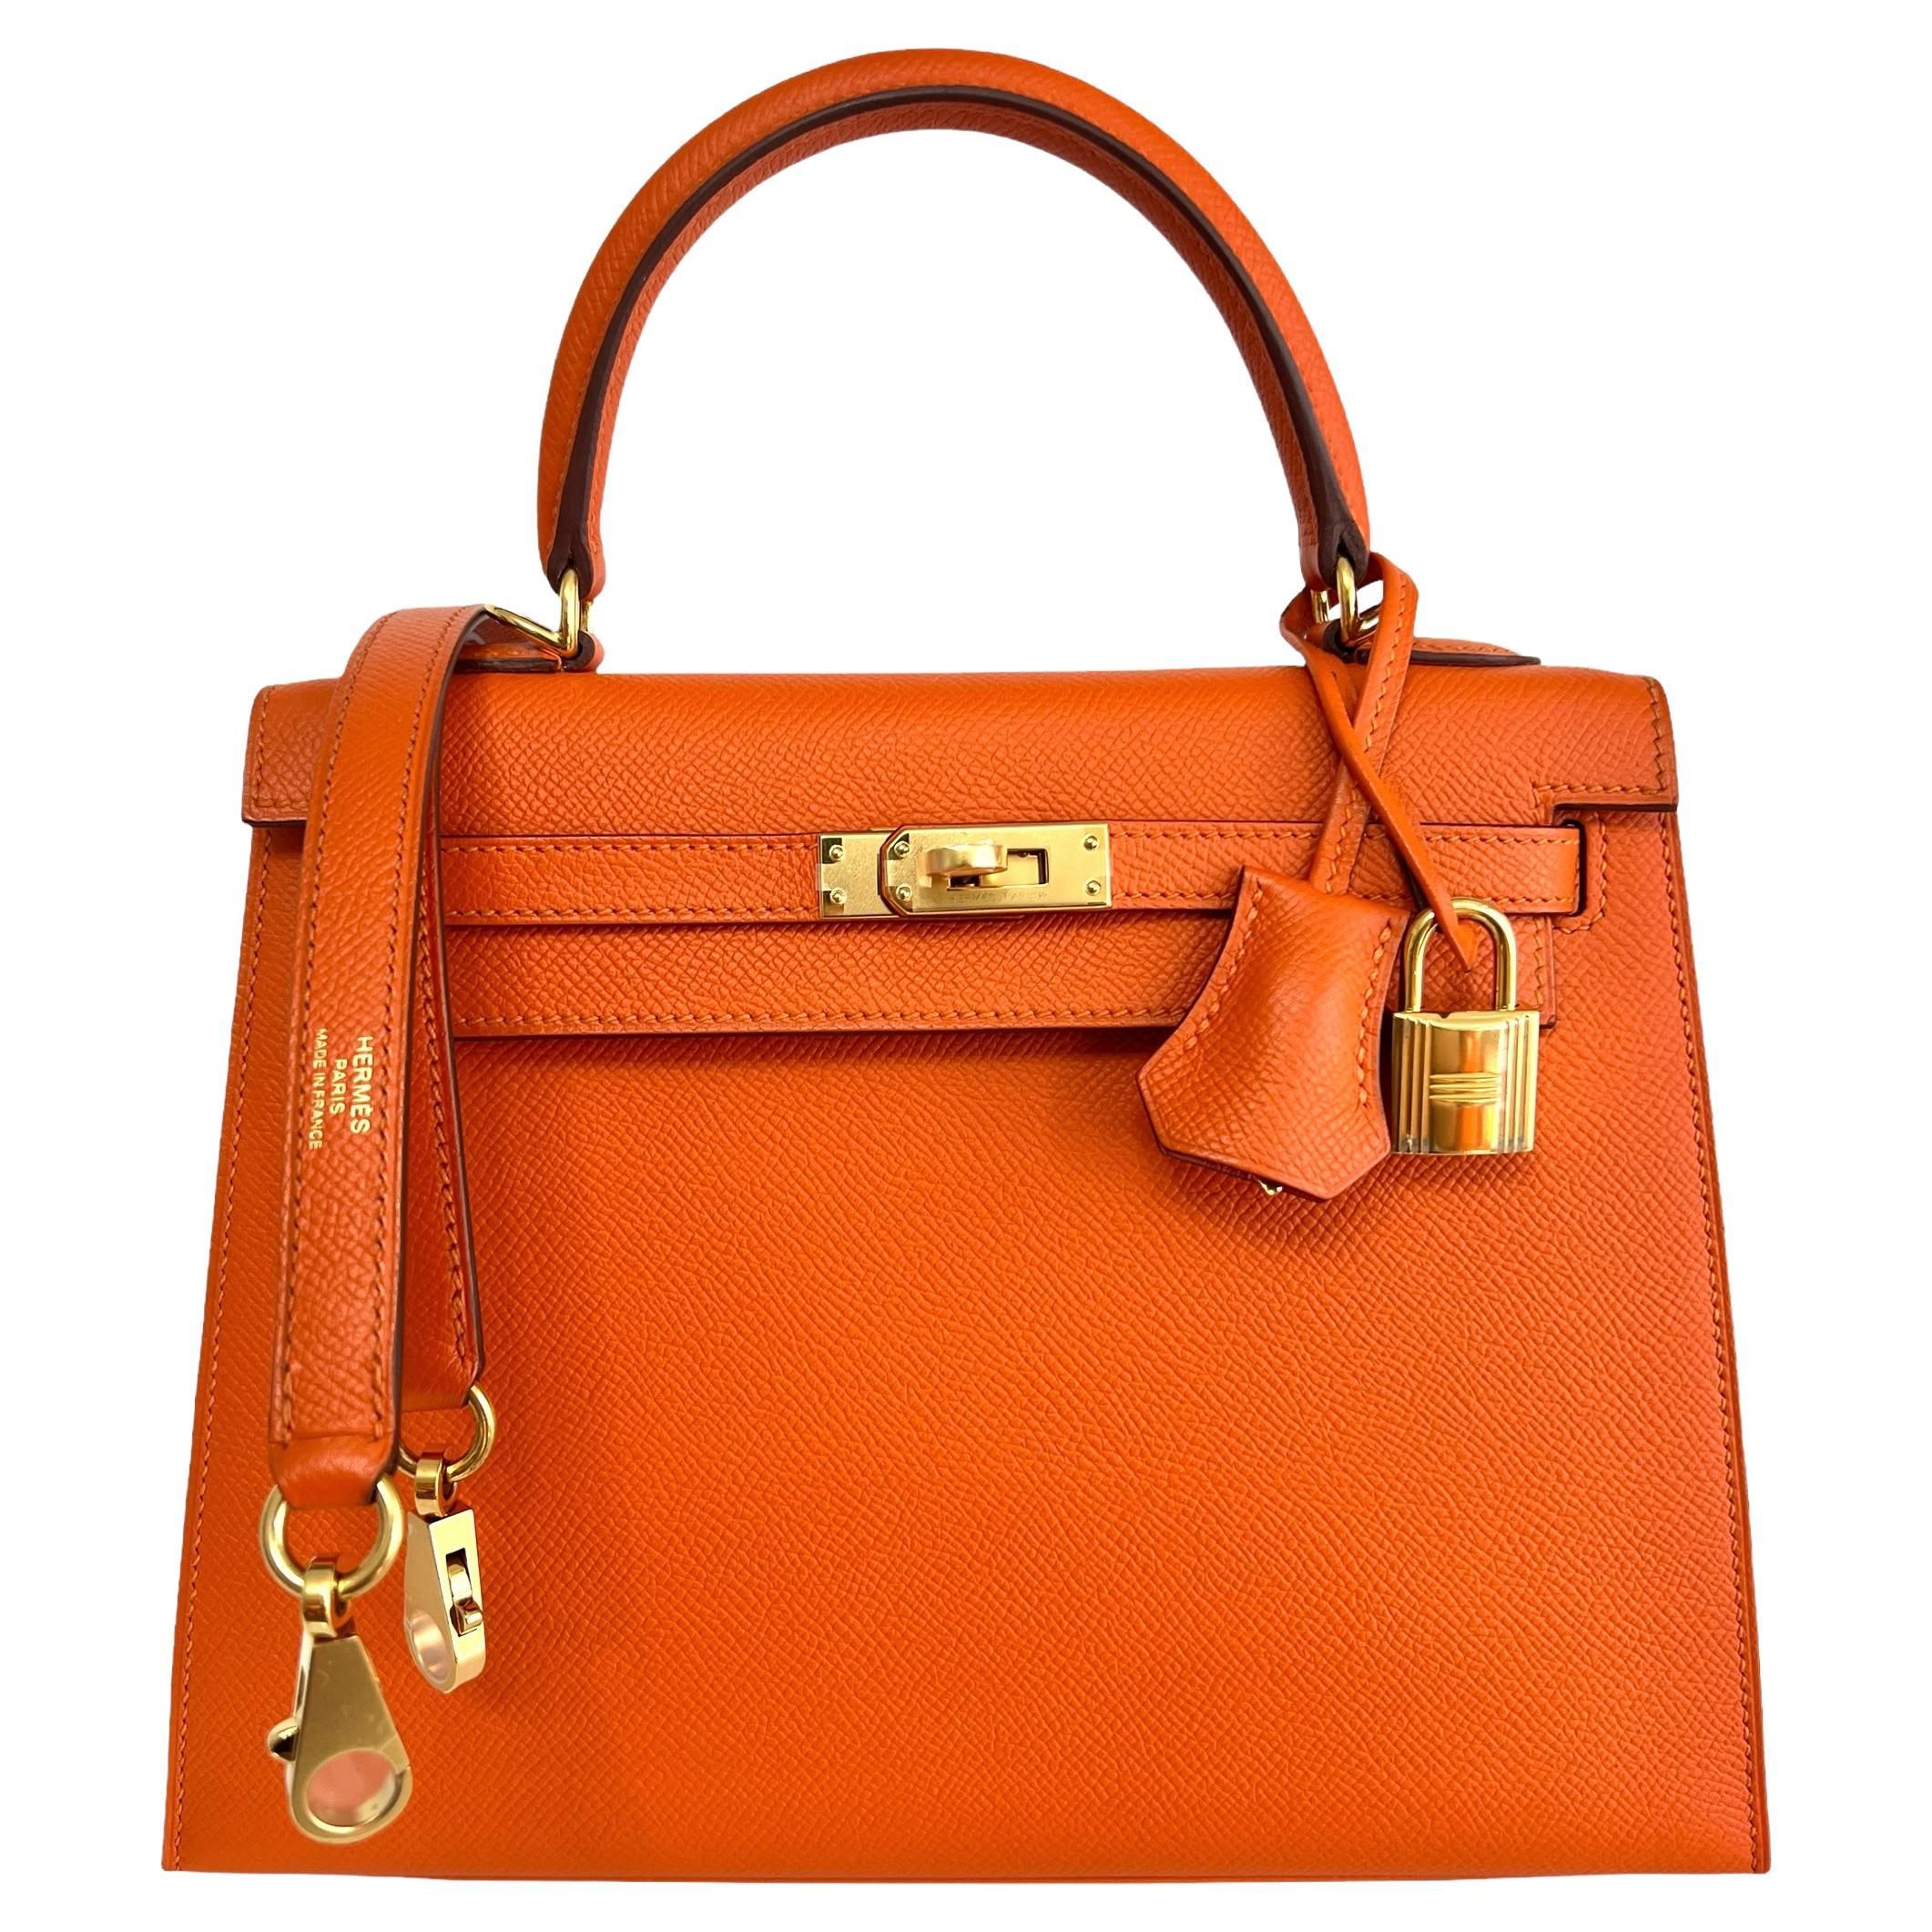 Where to buy the Hermes Kelly